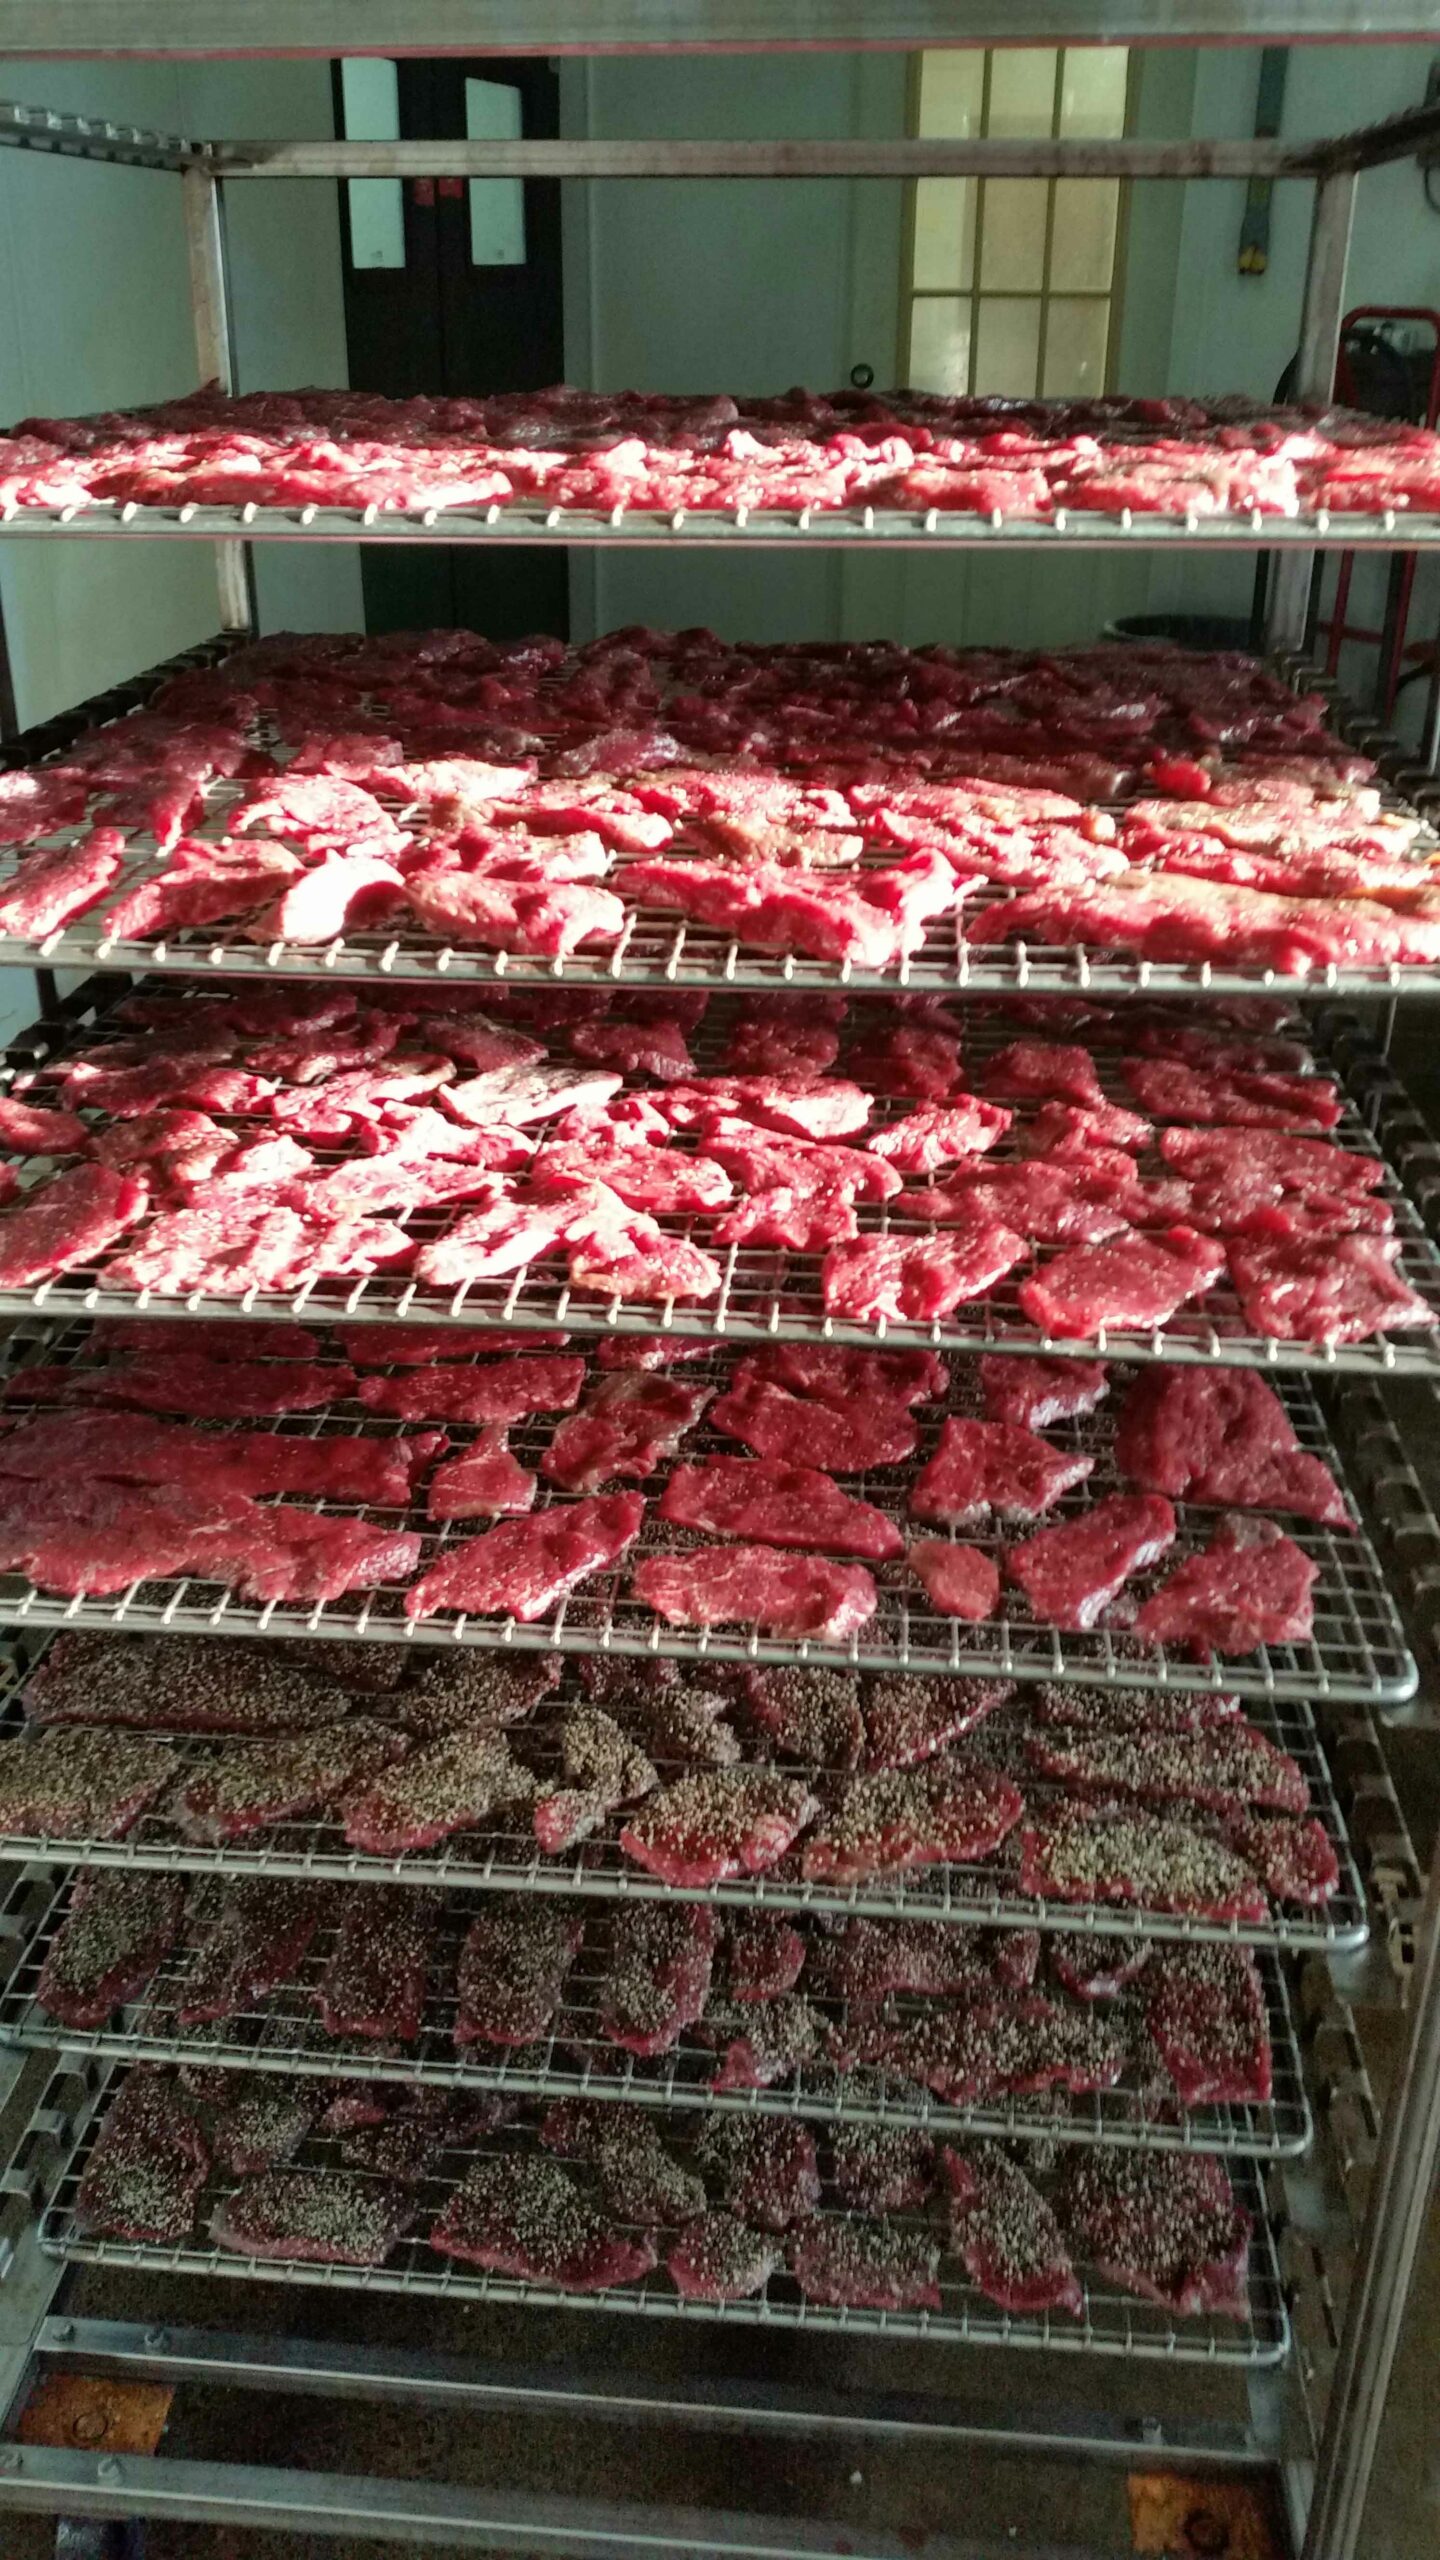 Drying meat on racks at Century Oak Packing Co